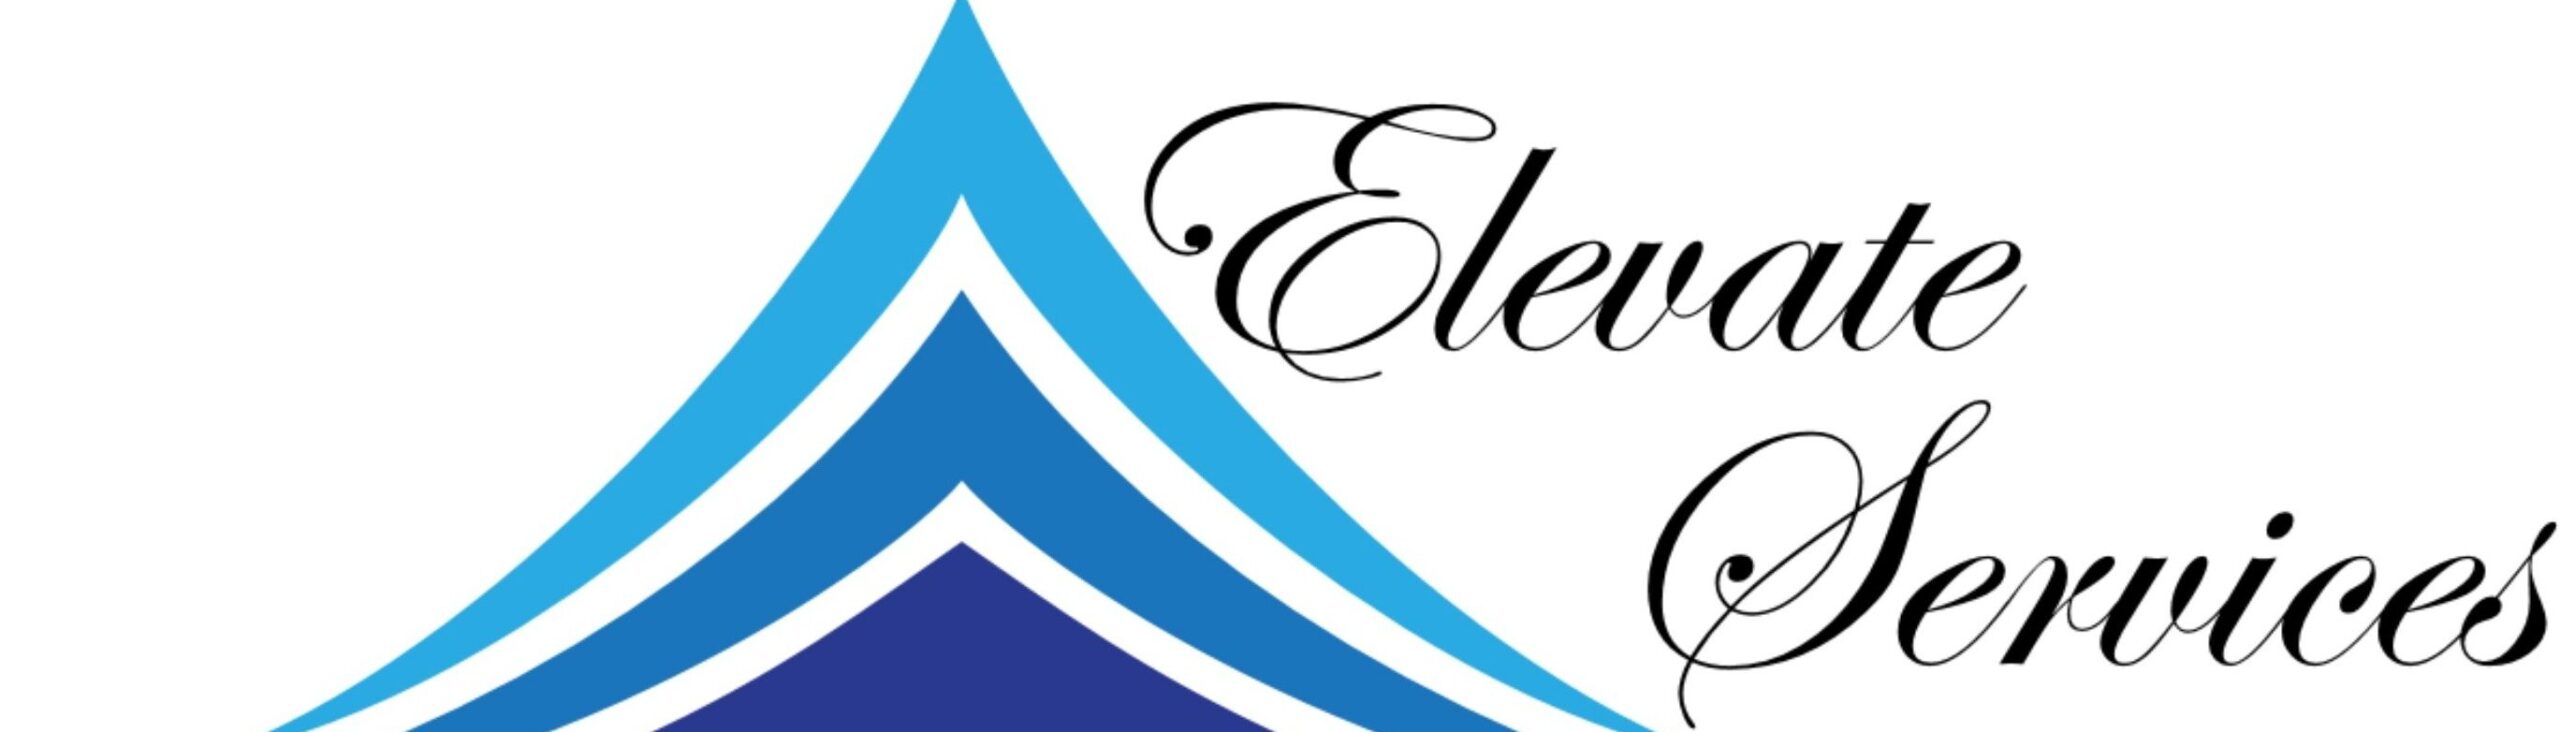 Elevate Services Marketing & Communications